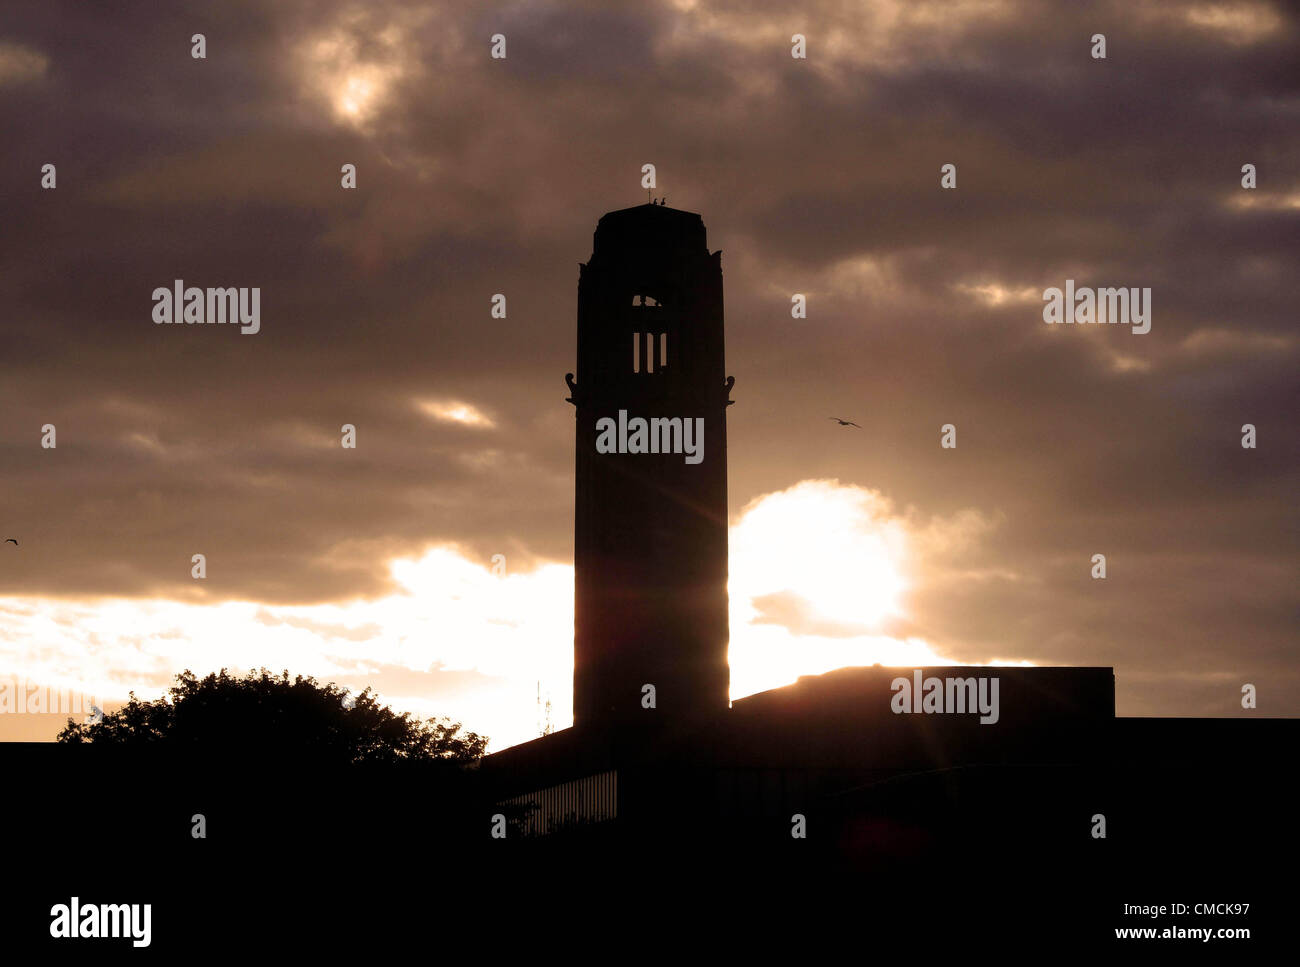 Swansea - UK - 19th July 2012 :  The sky glows as dawn breaks this morning over the Guildhall tower in the centre of Swansea, UK. Stock Photo